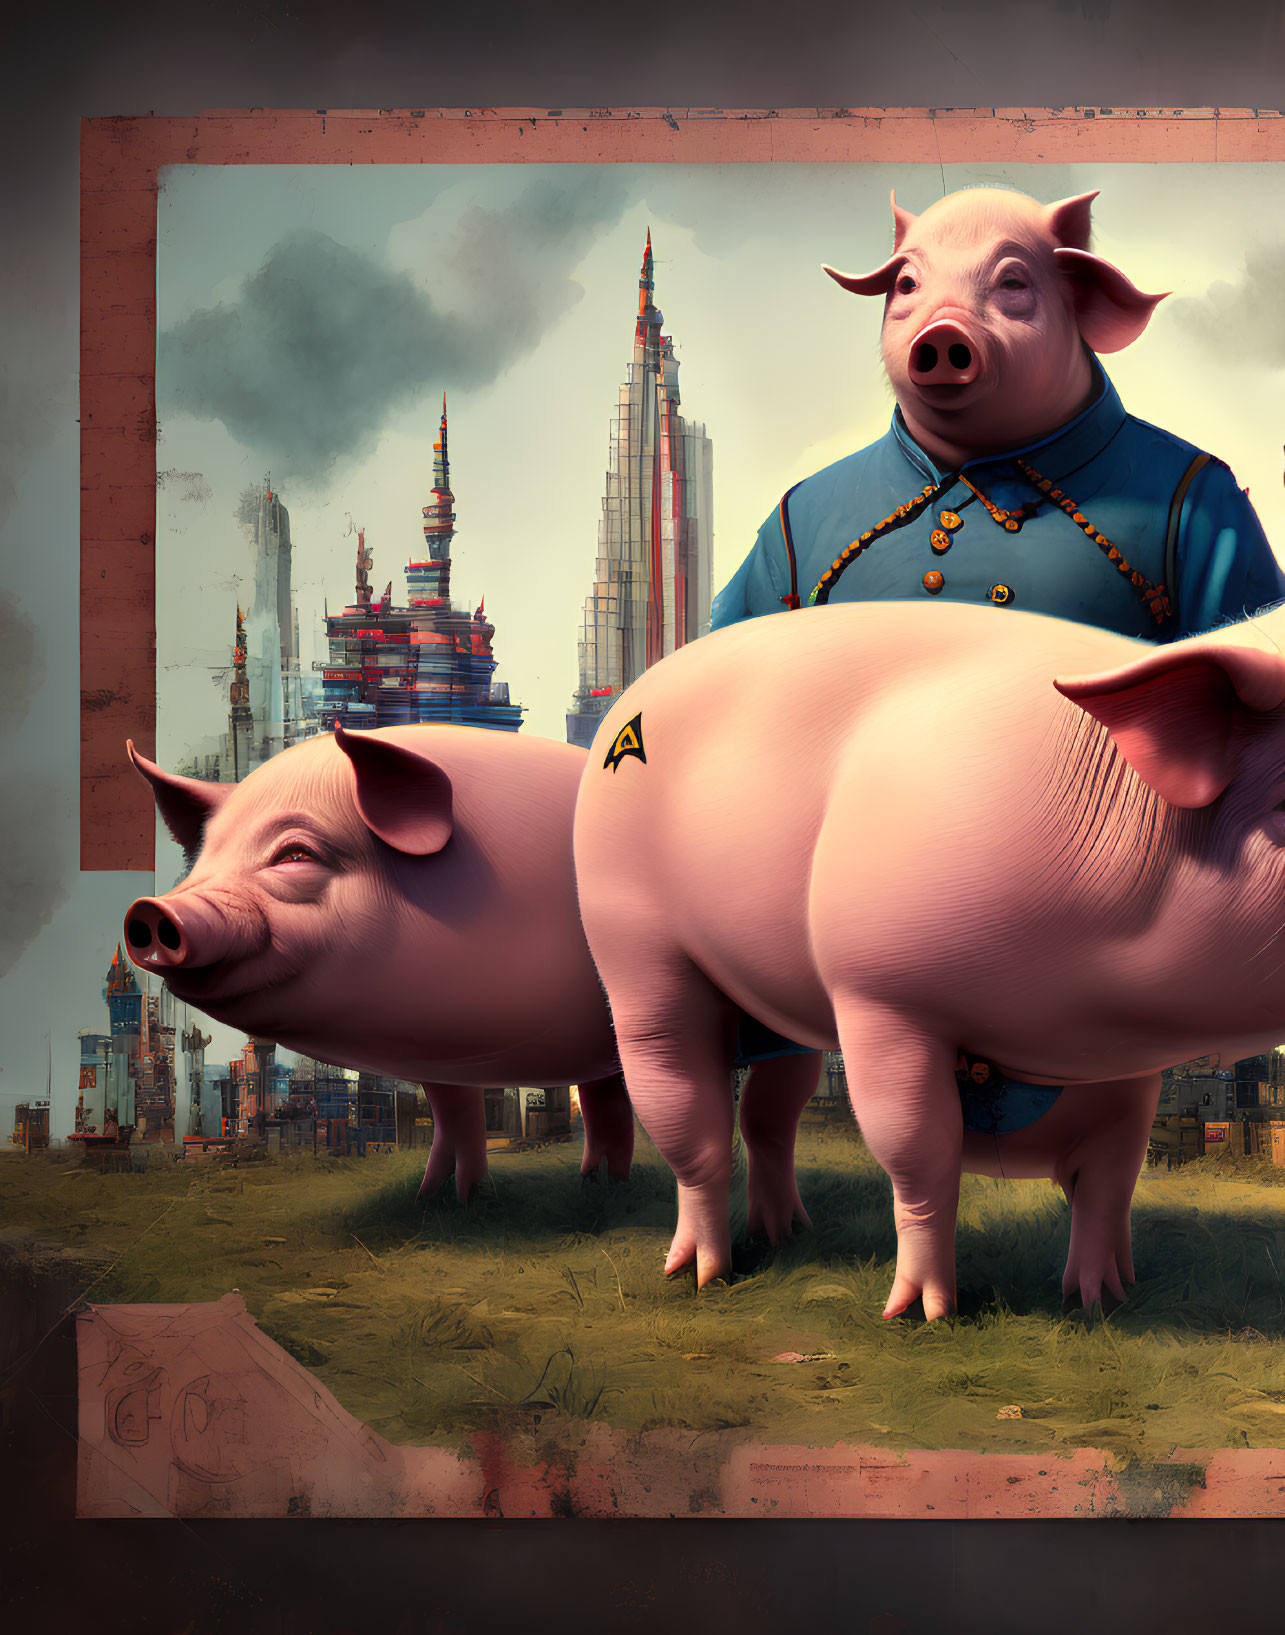 Anthropomorphic pigs in clothing with futuristic cityscape